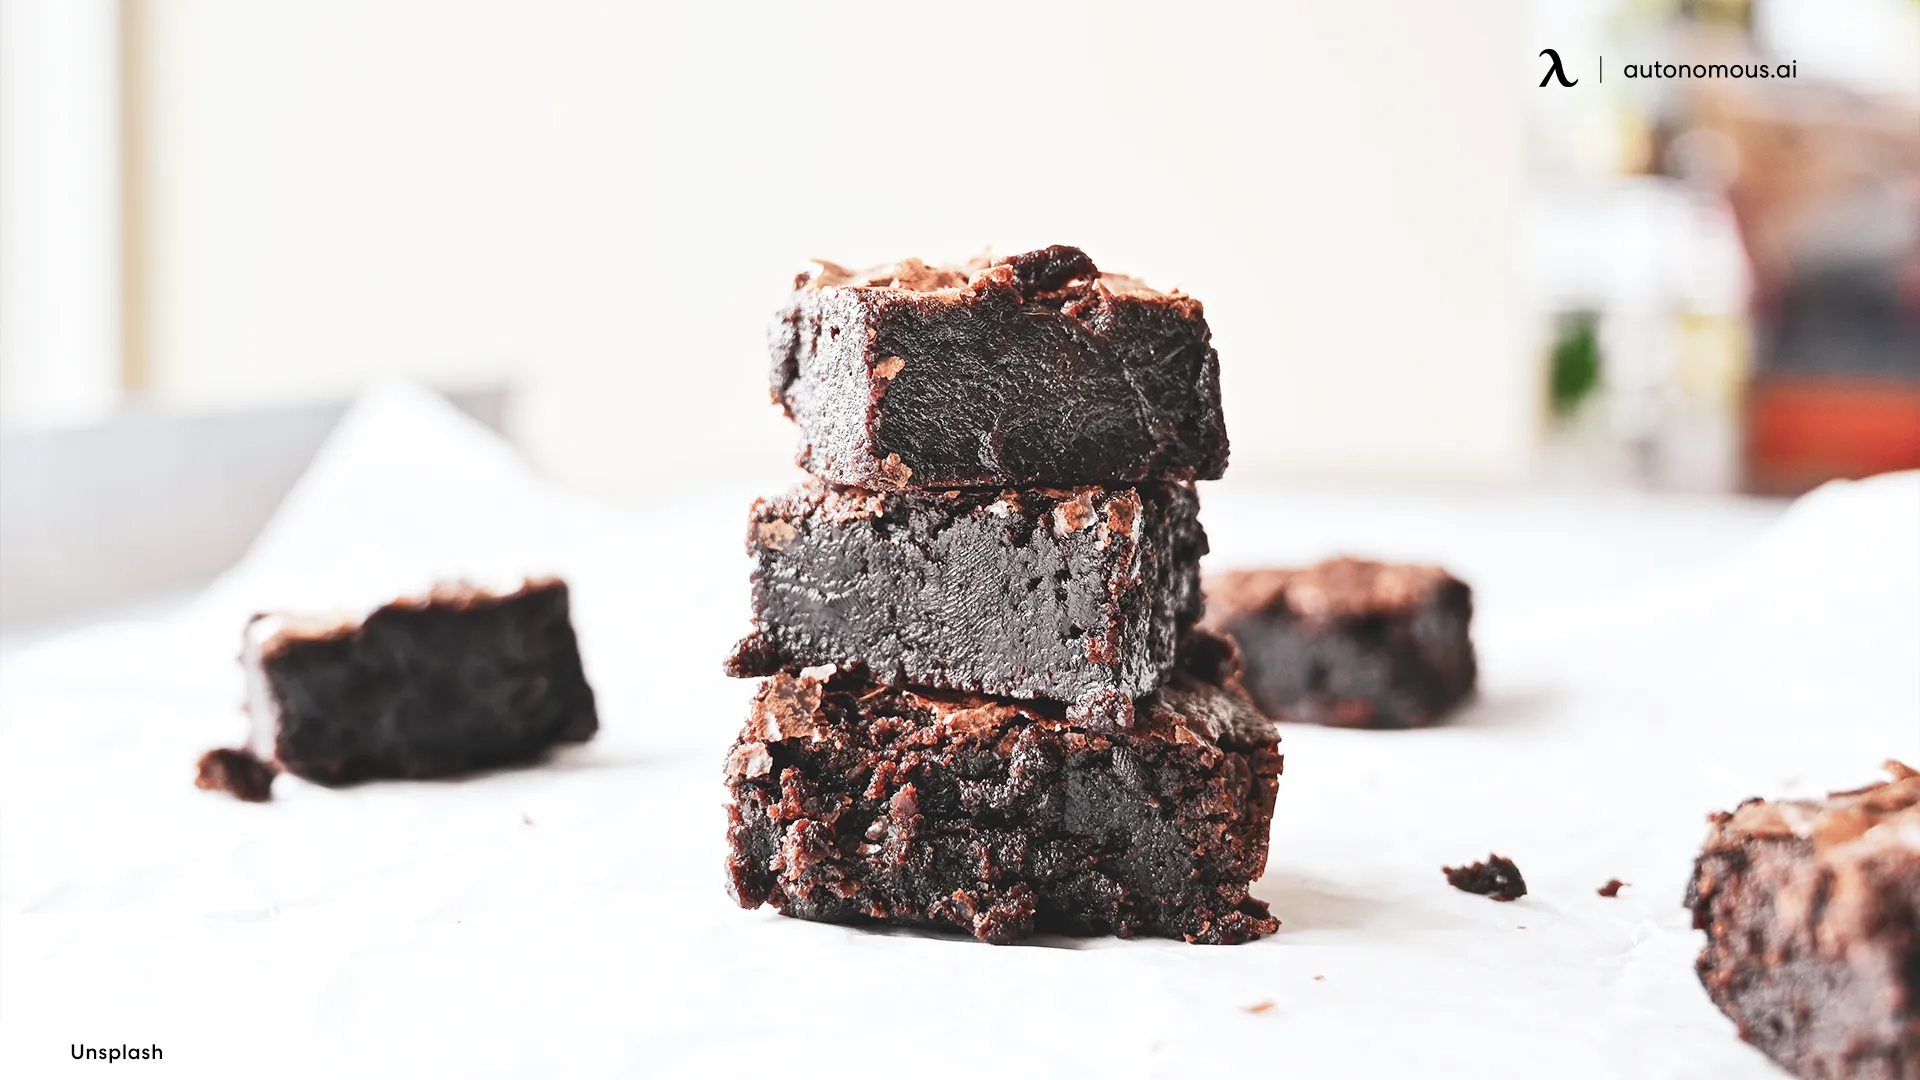 Brownies, Cookies, and Other Desserts